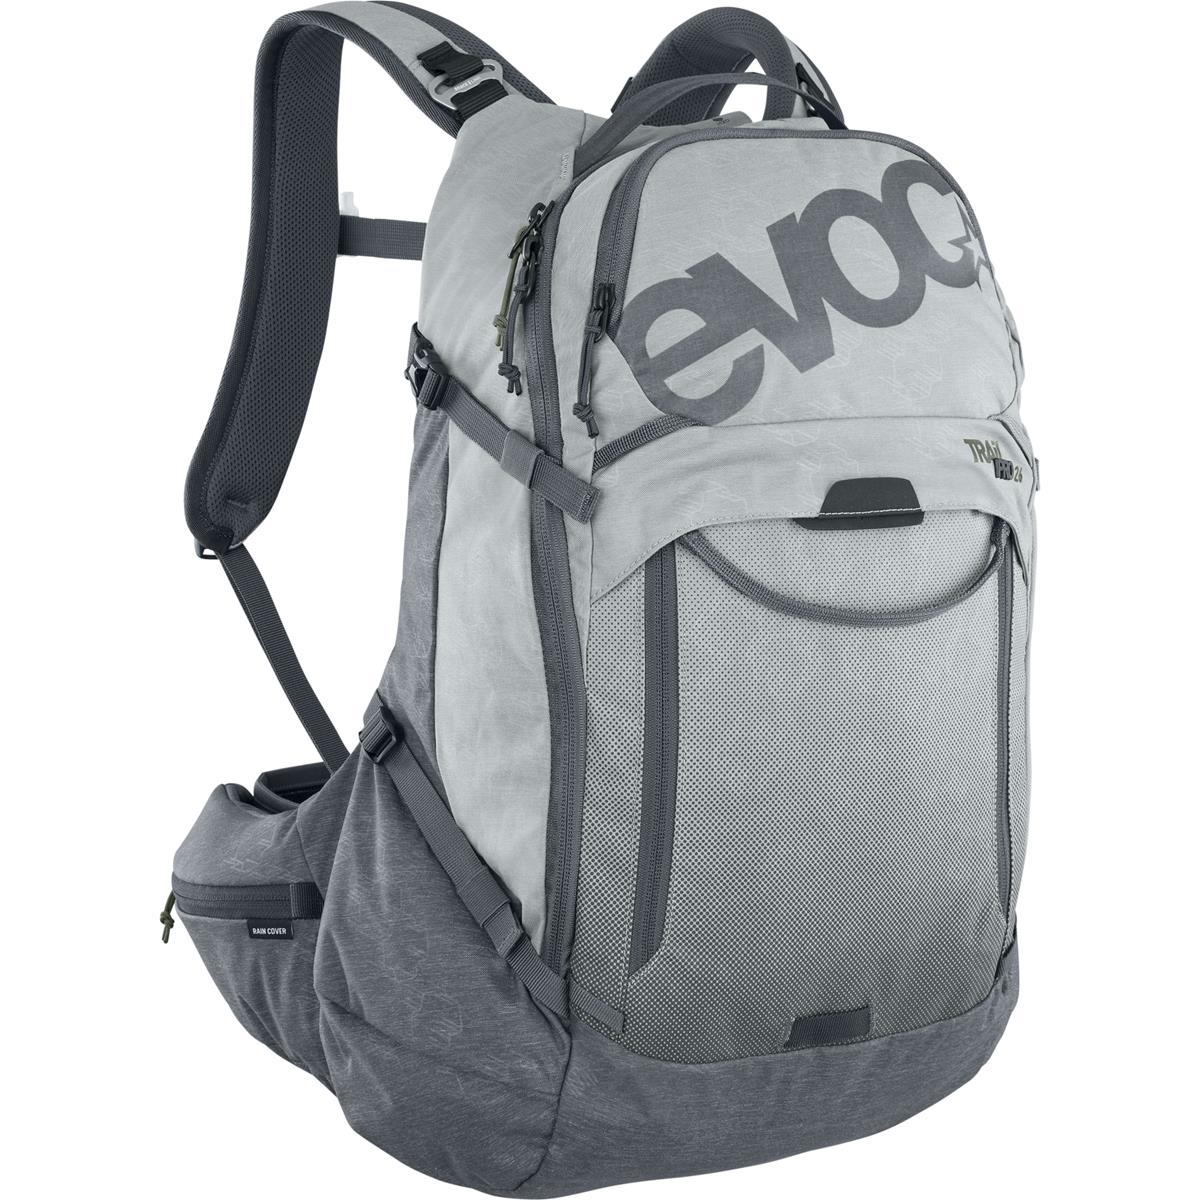 Evoc Protector Backpack Trail Pro 26 26L - Stone/Carbon Gray